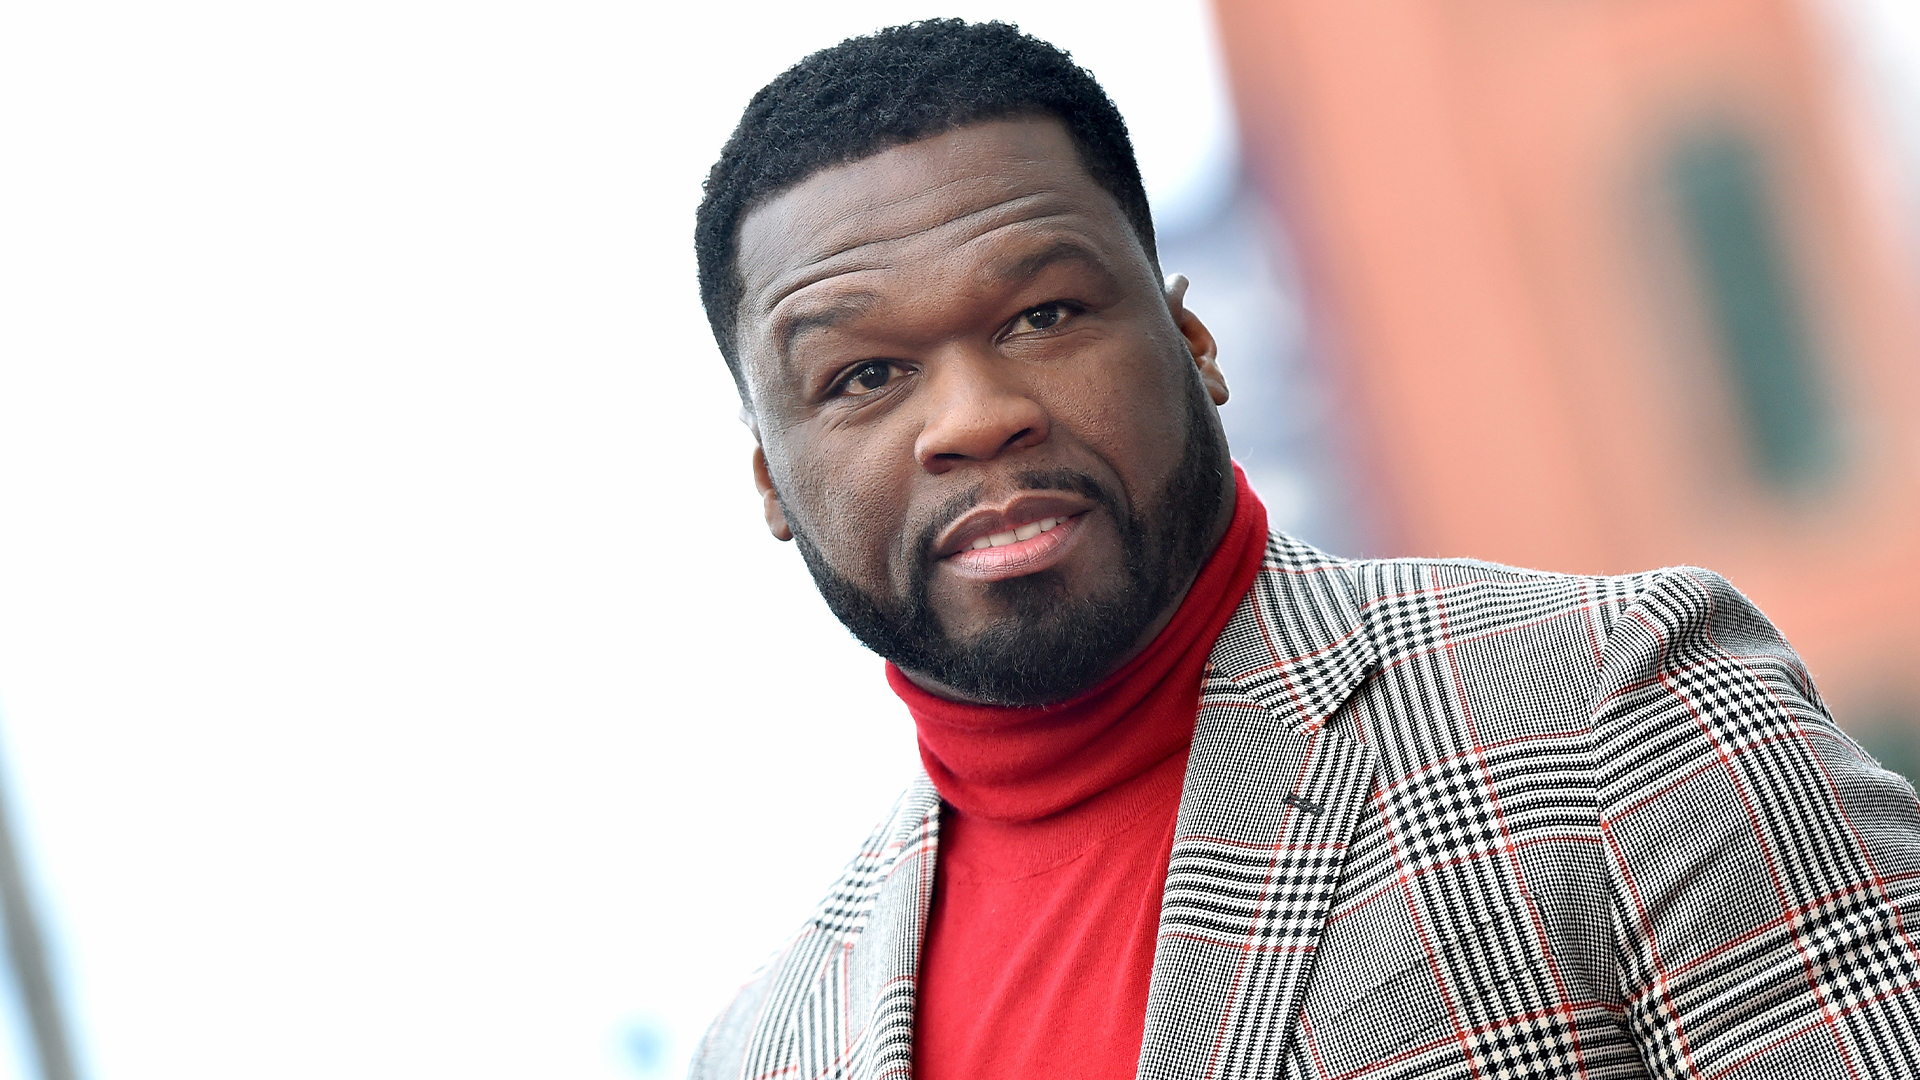 A Former Employee Of 50 Cent's Sire Spirits Pleads Guilty To $2.2M Embezzlement Scheme